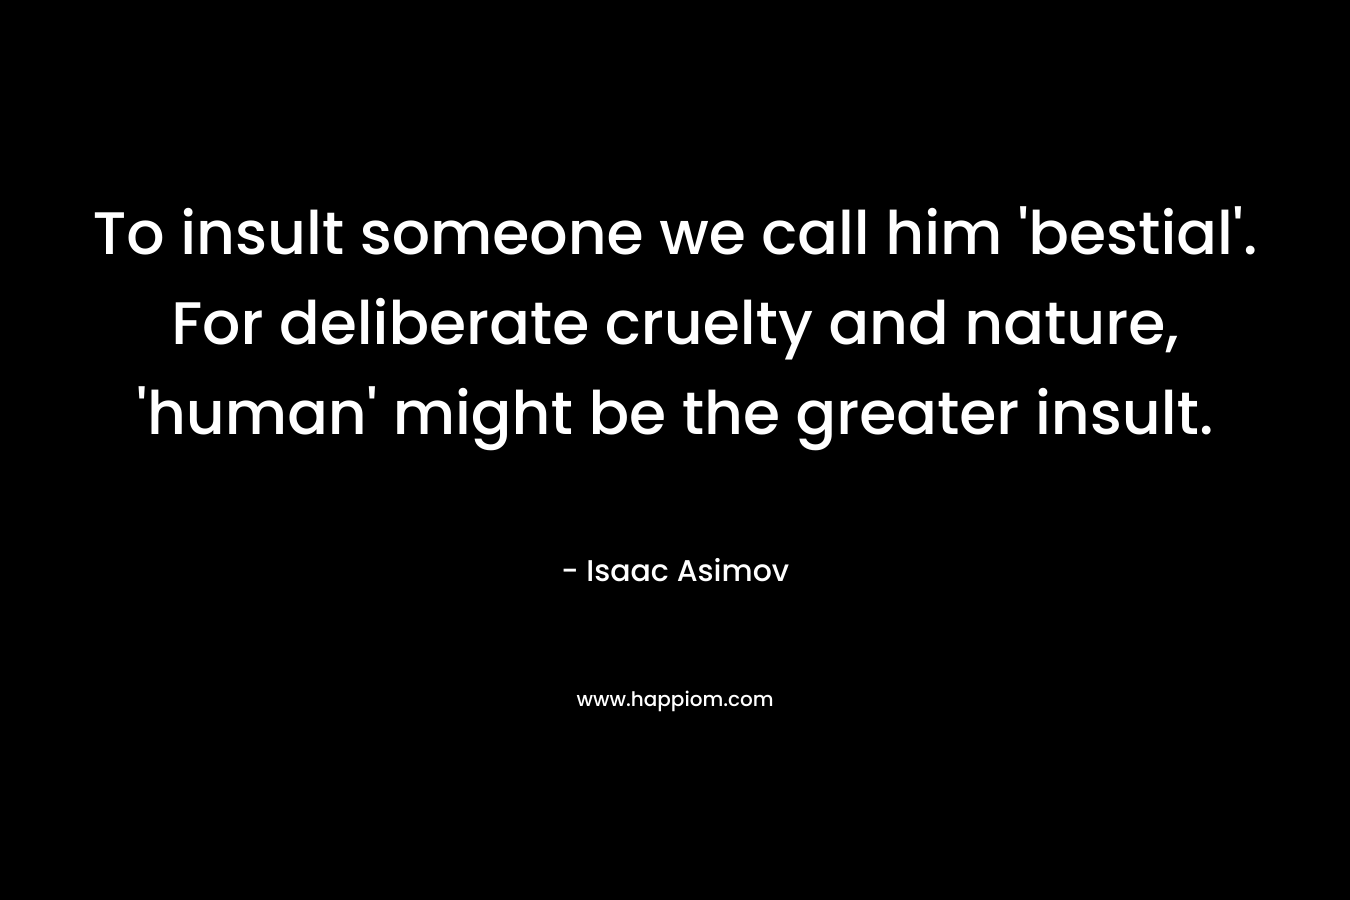 To insult someone we call him 'bestial'. For deliberate cruelty and nature, 'human' might be the greater insult.